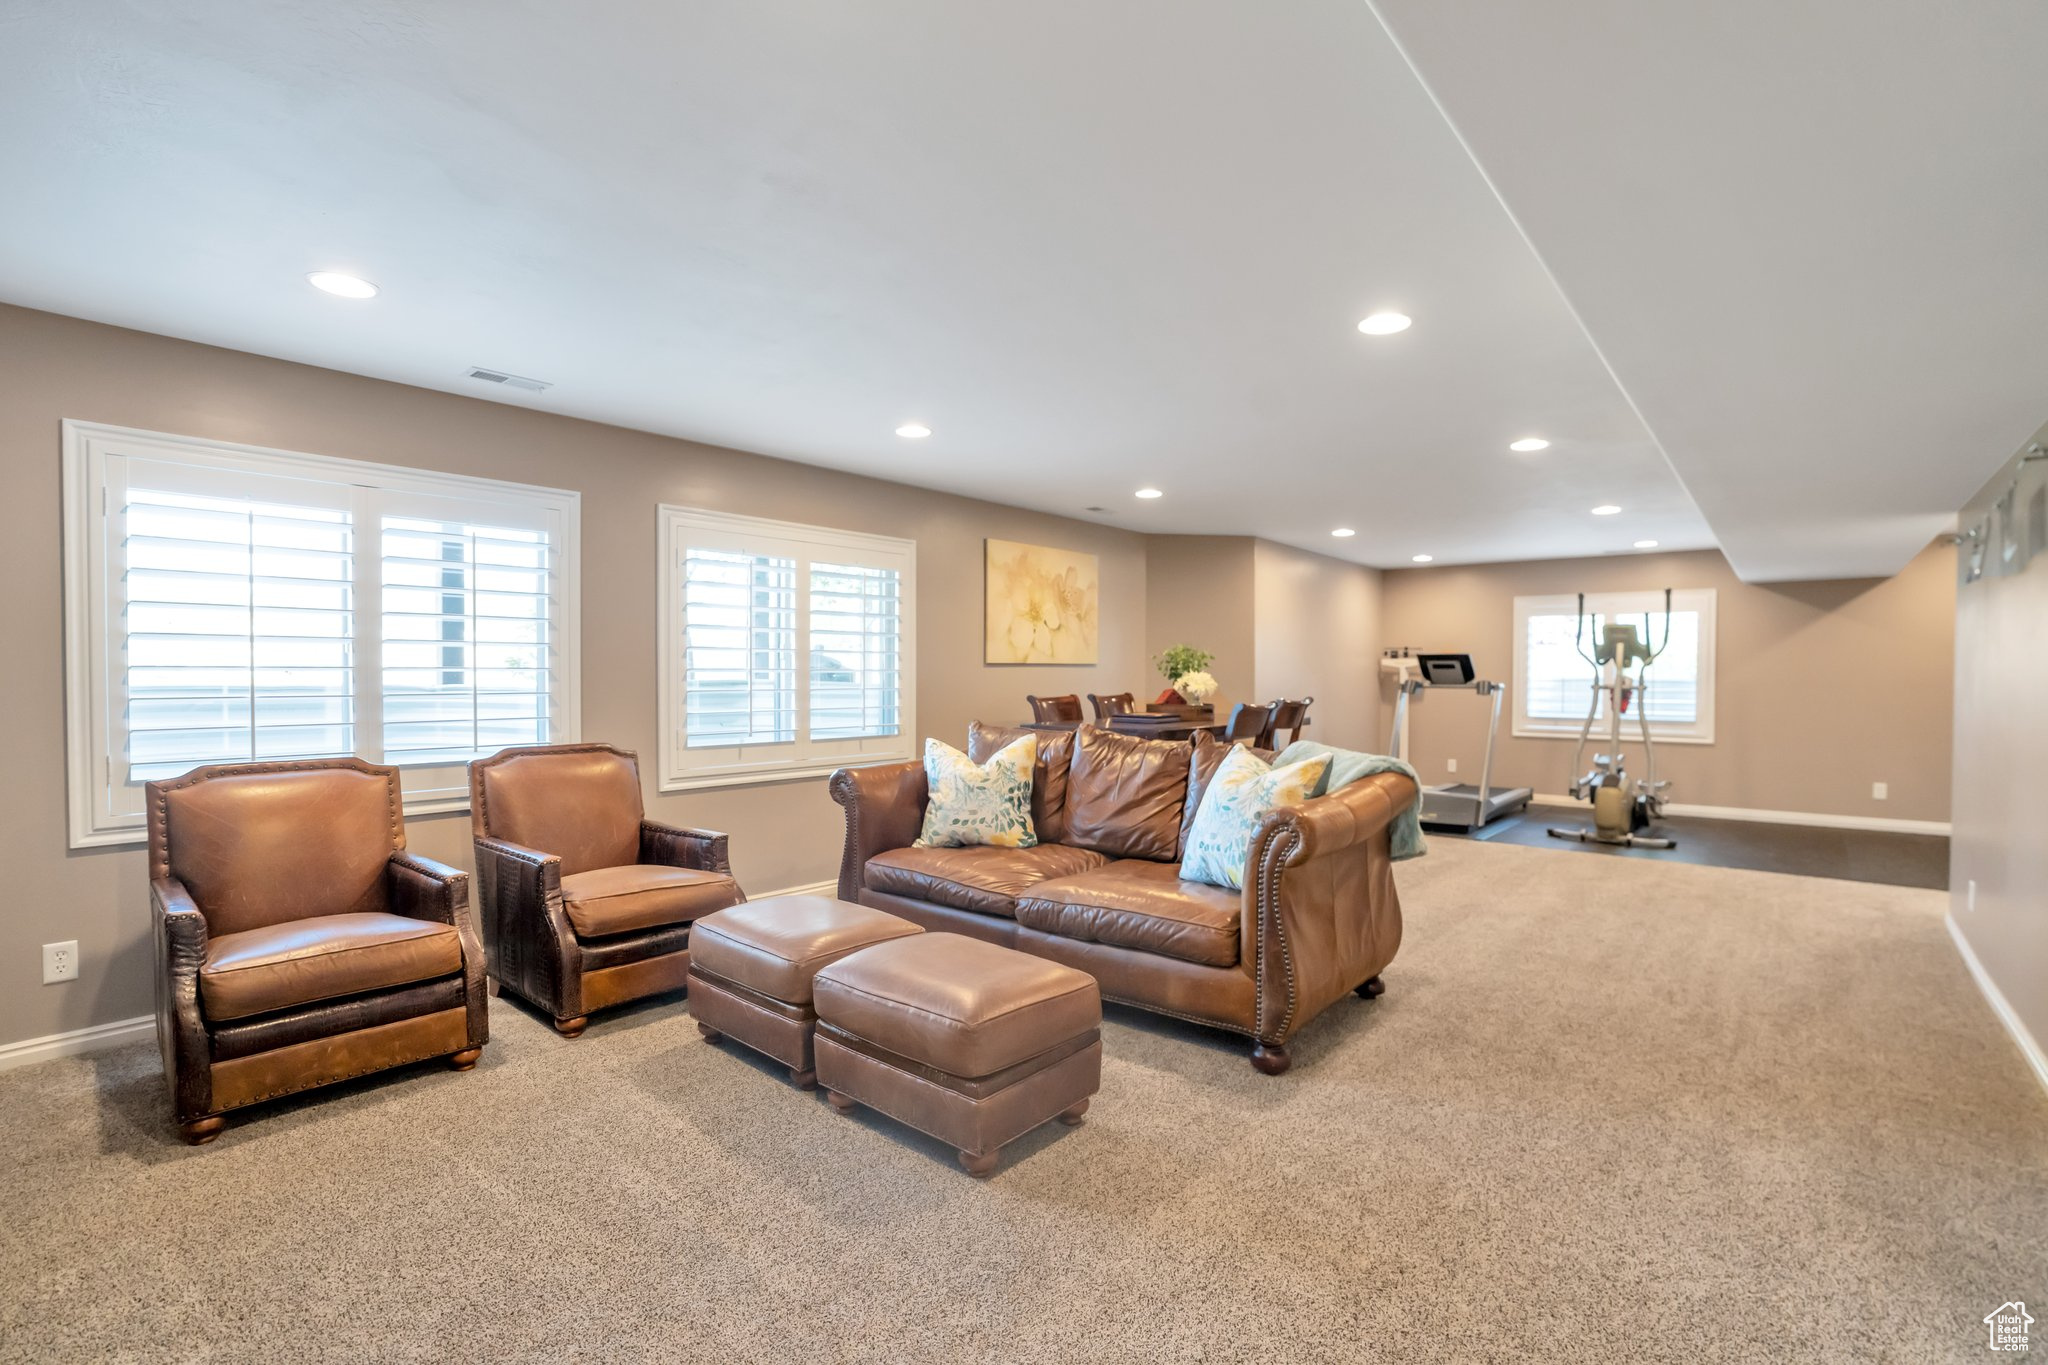 Basement Family Room and Exercise Area